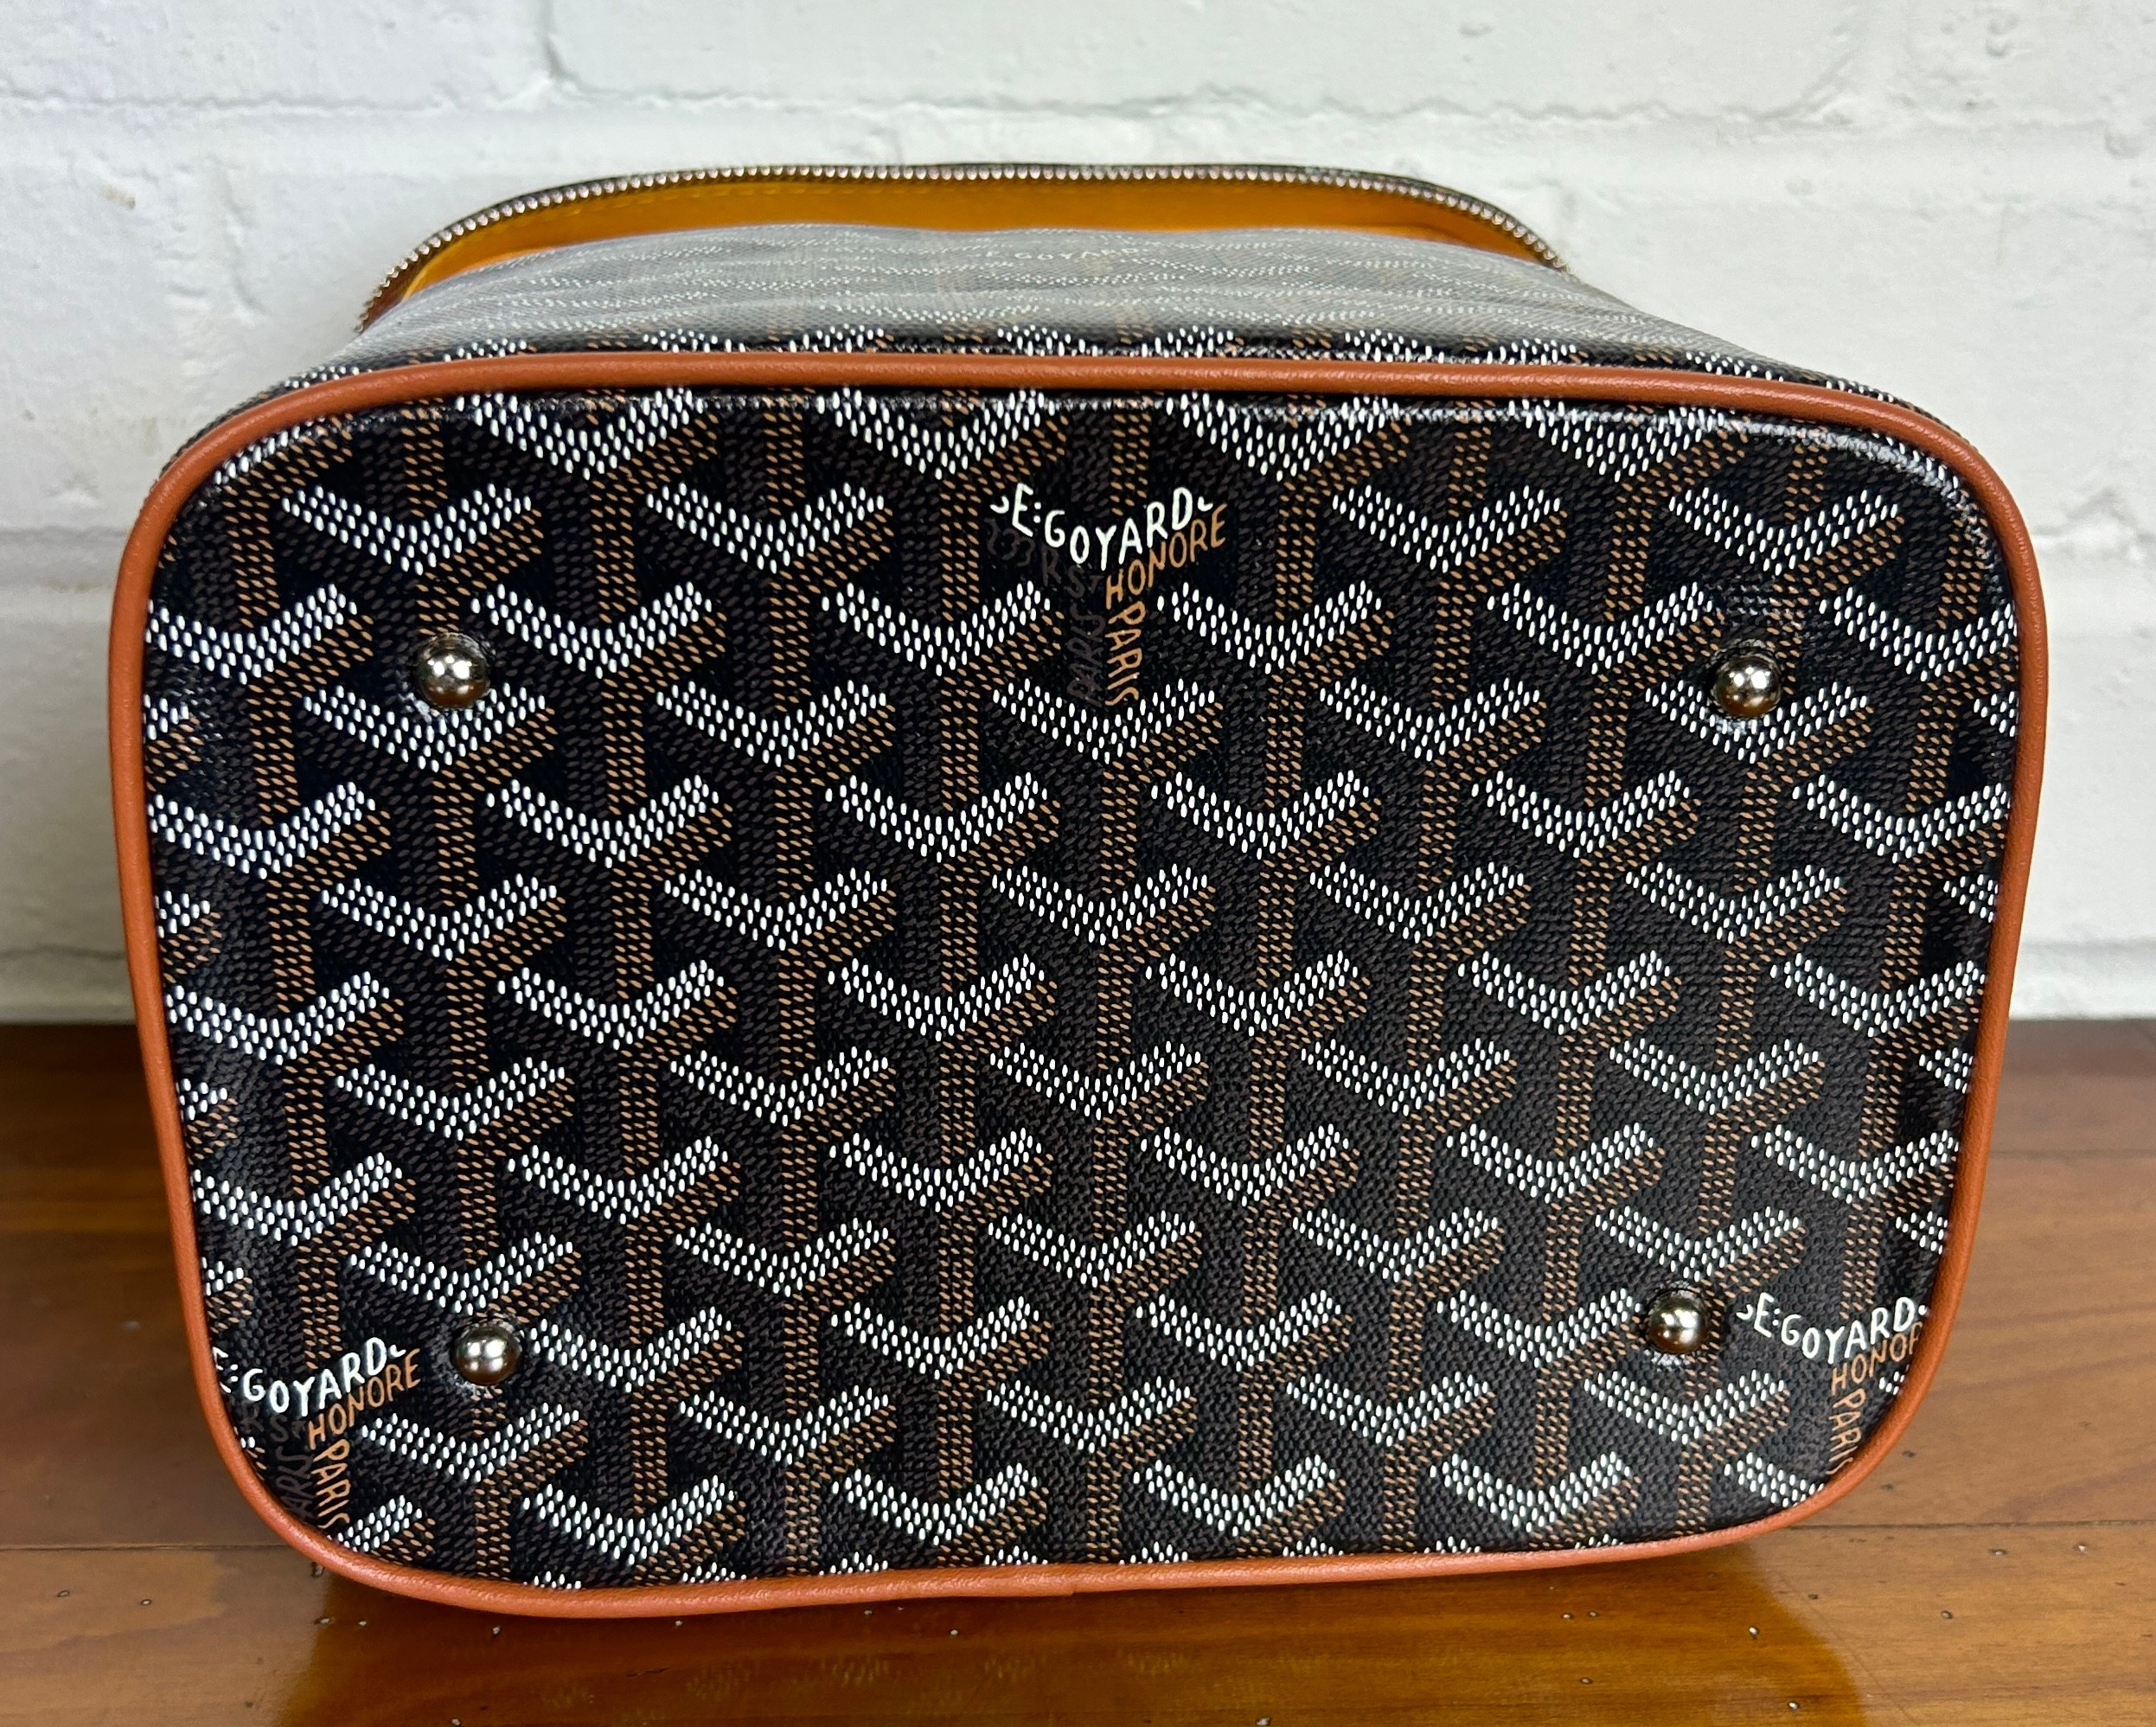 A GOYARD MUSE VANITY CASE IN BLACK AND TAN, With box. - Image 4 of 7